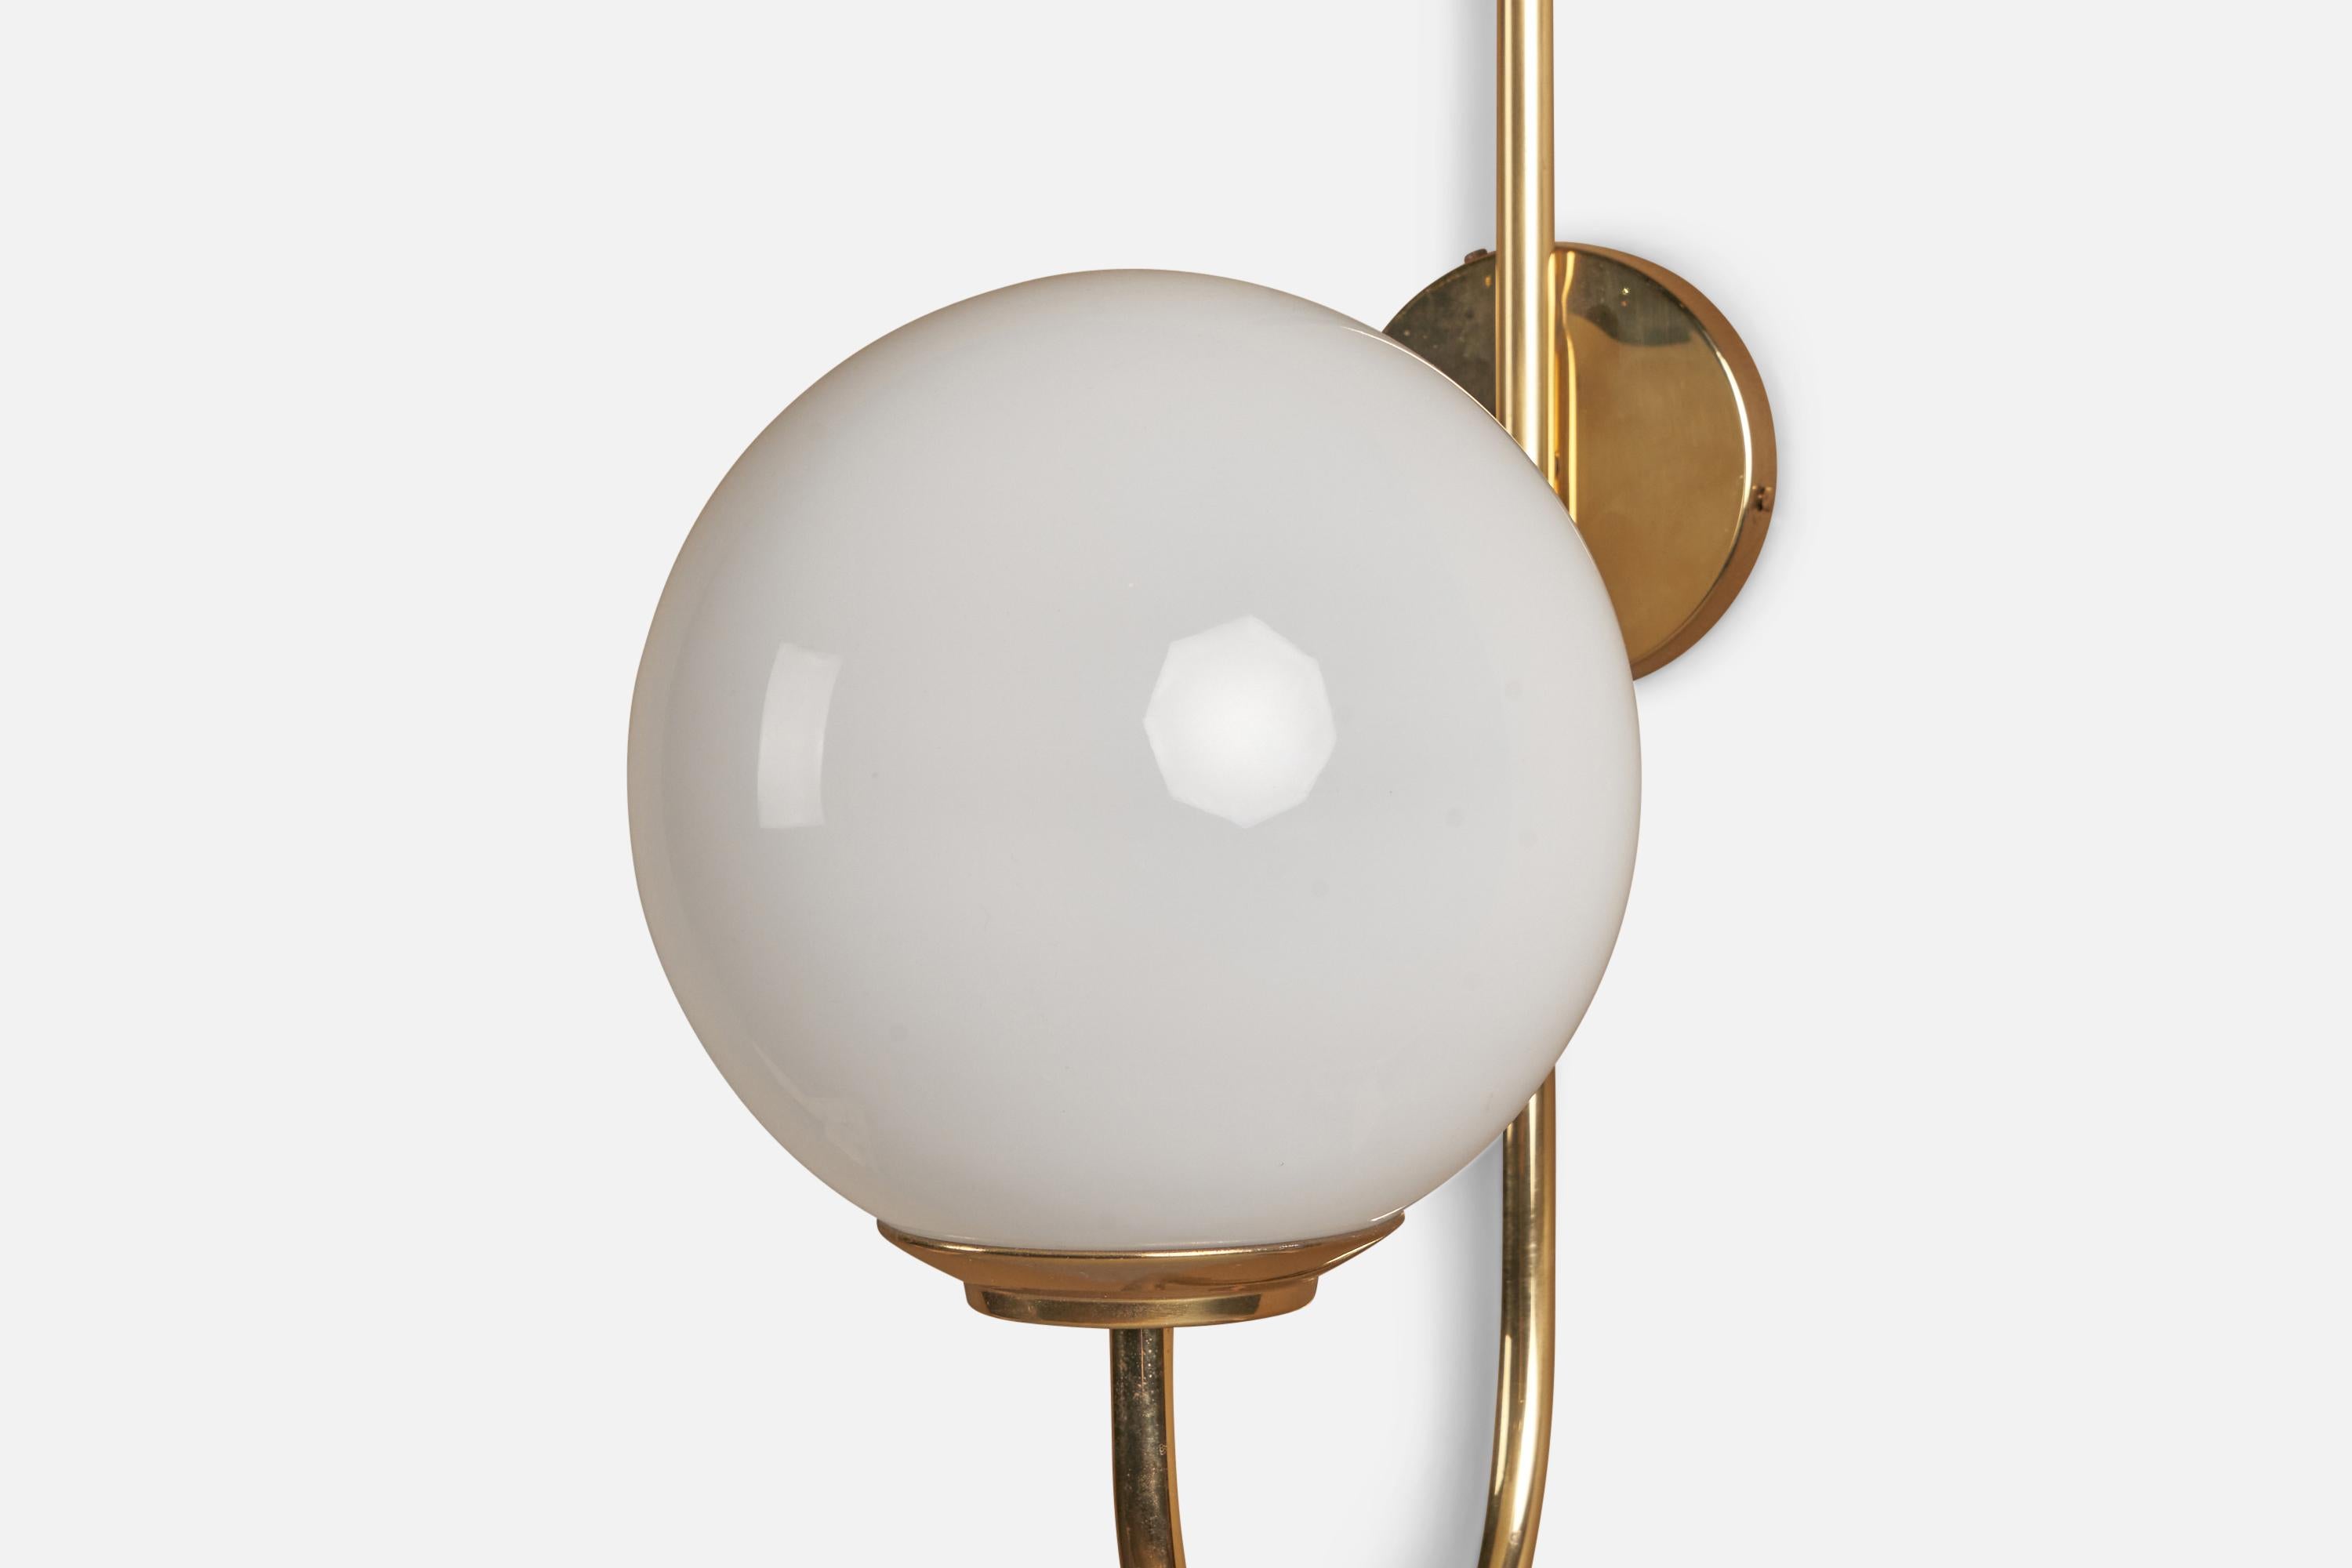 Mid-20th Century Luigi Caccia Dominioni, Sizeable Wall Lights, Brass, Glass, Italy, 1950s For Sale